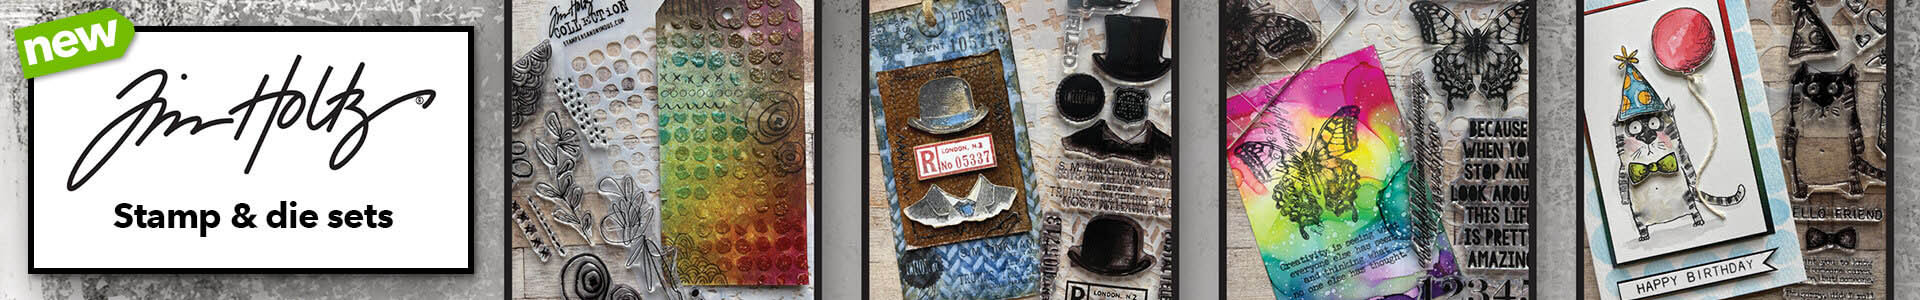 Tim Holtz has new stamp & dies sets for card making & more at JOANN